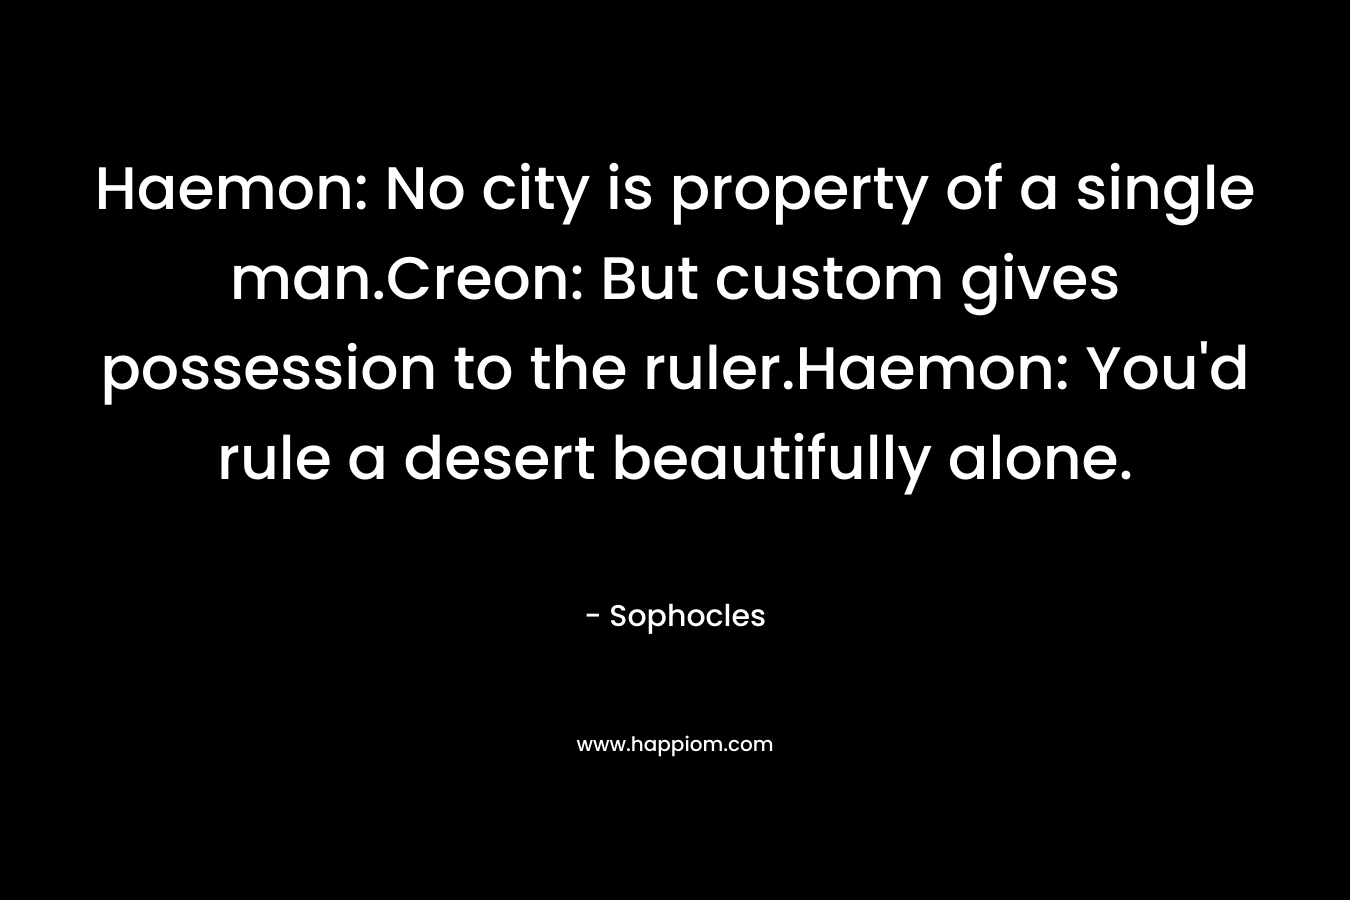 Haemon: No city is property of a single man.Creon: But custom gives possession to the ruler.Haemon: You'd rule a desert beautifully alone.